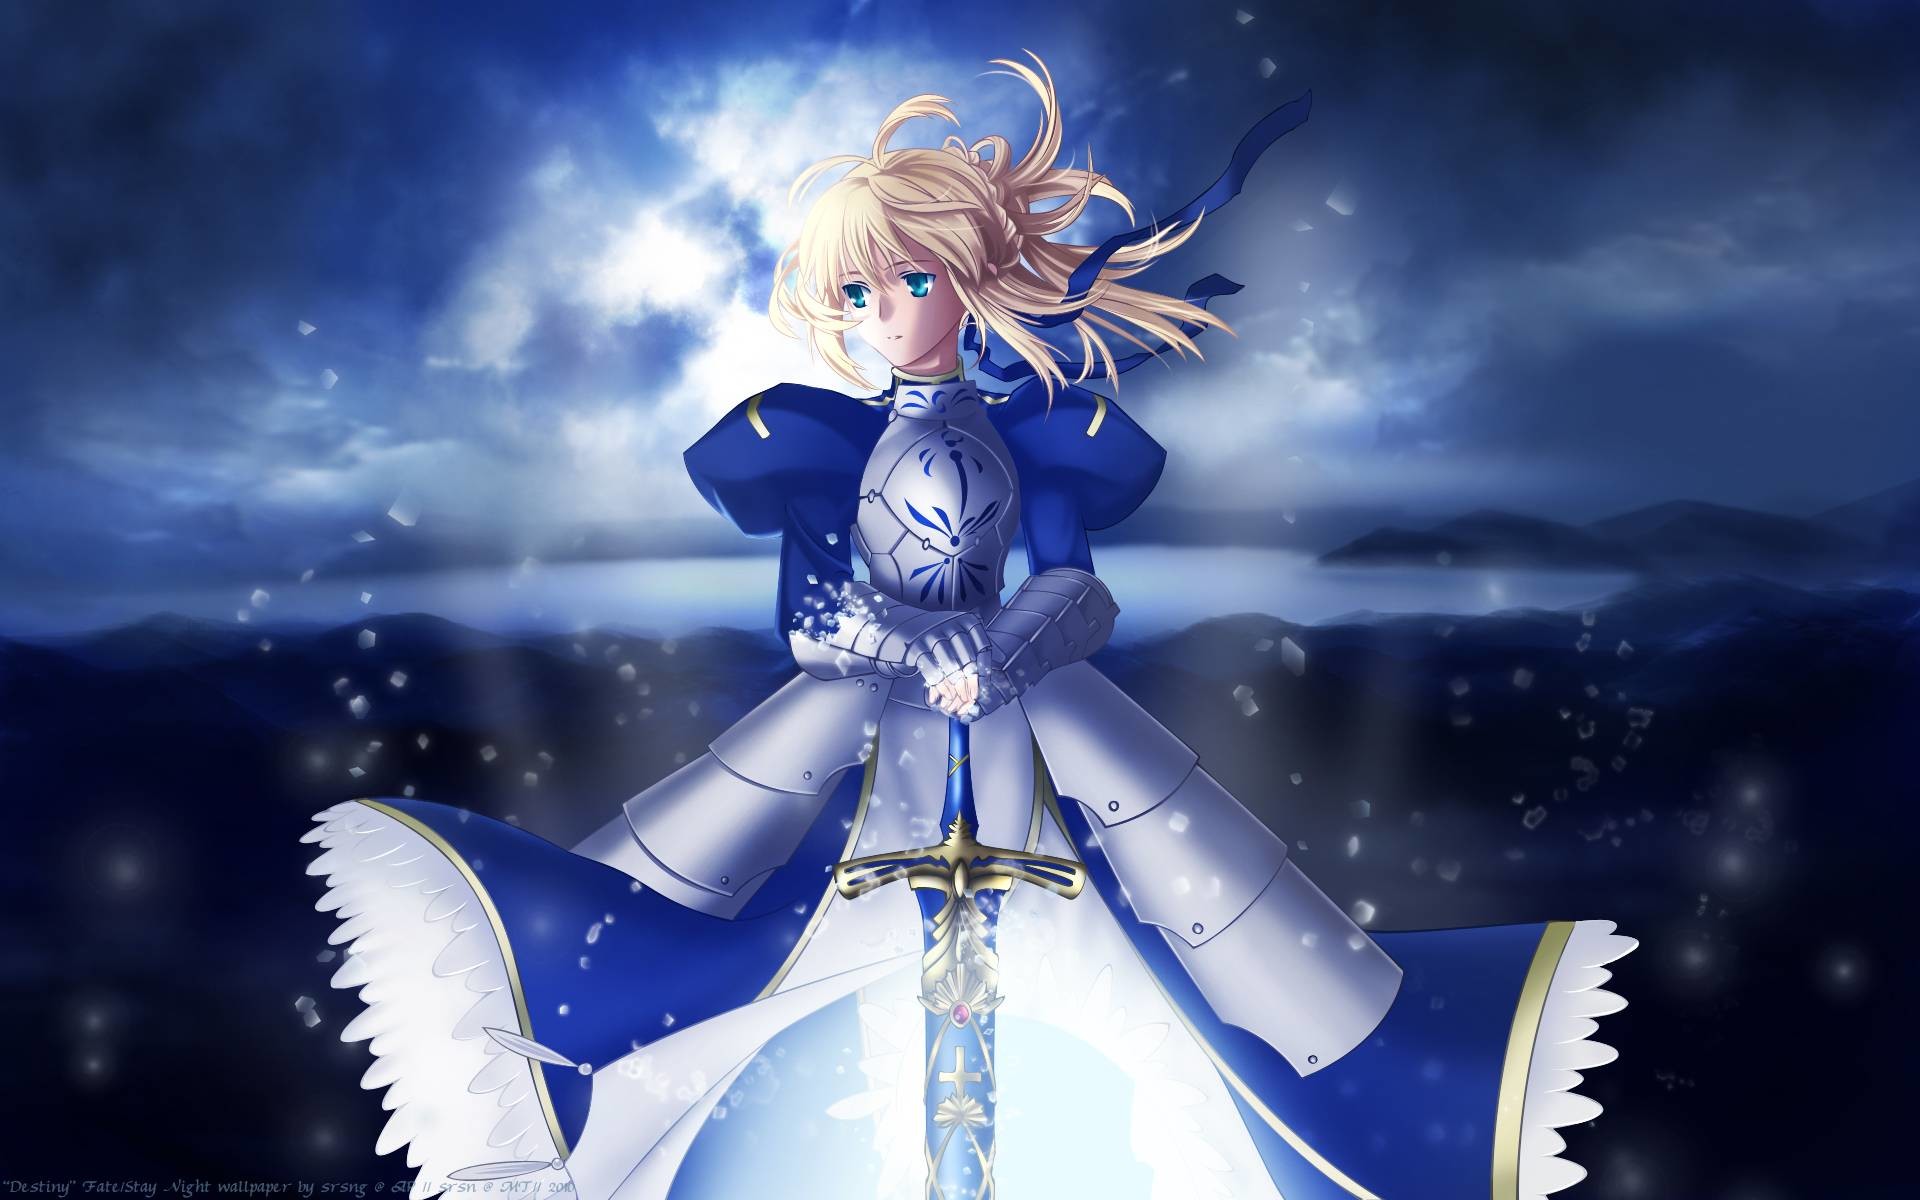 Saber – Fate/Stay Night Wallpaper